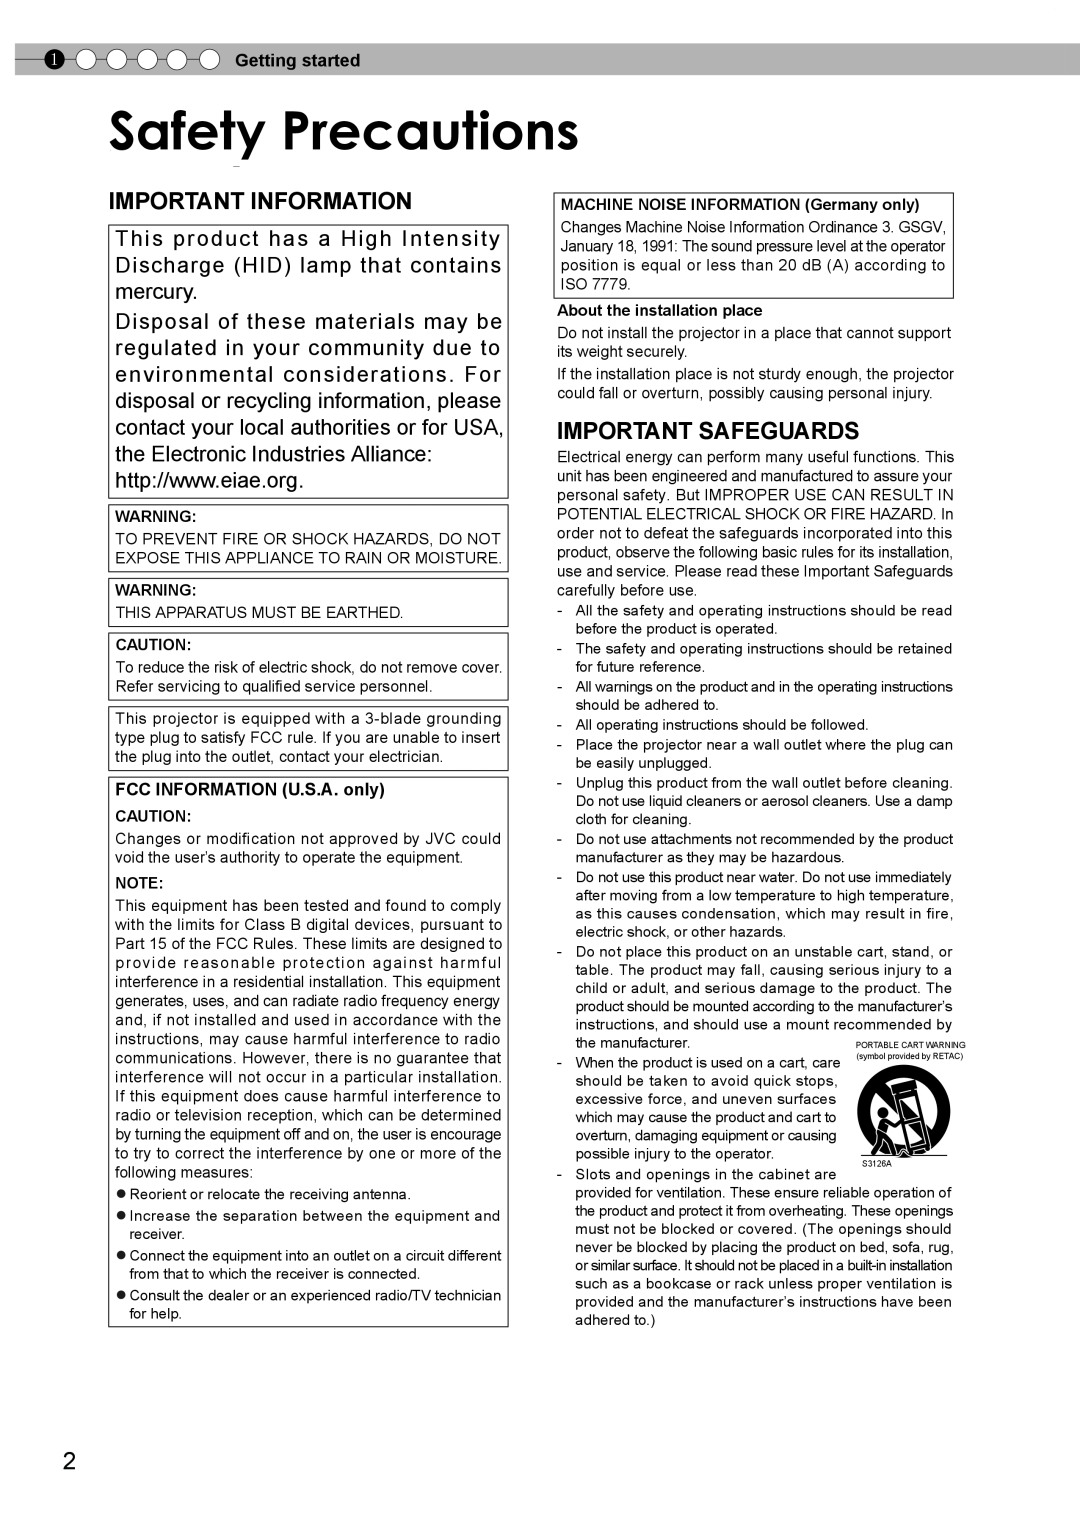 JVC PC007182399-1 warranty Safetyf ty PrecautionsPrecautions, Important Information, Important Safeguards, Getting started 